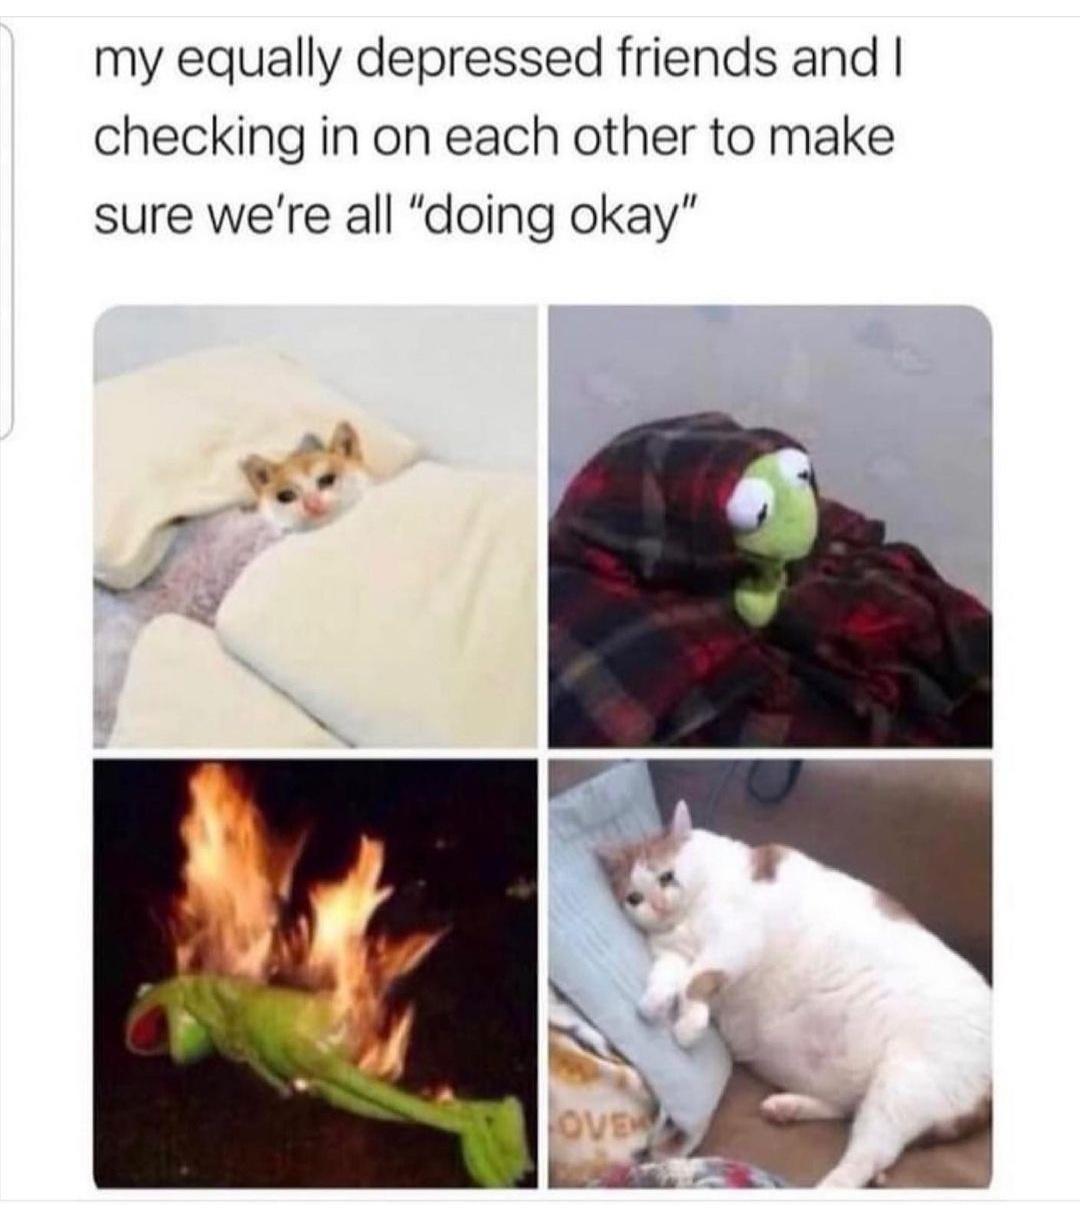 my equally depressed friends meme - my equally depressed friends and I checking in on each other to make sure we're all "doing okay" Ove